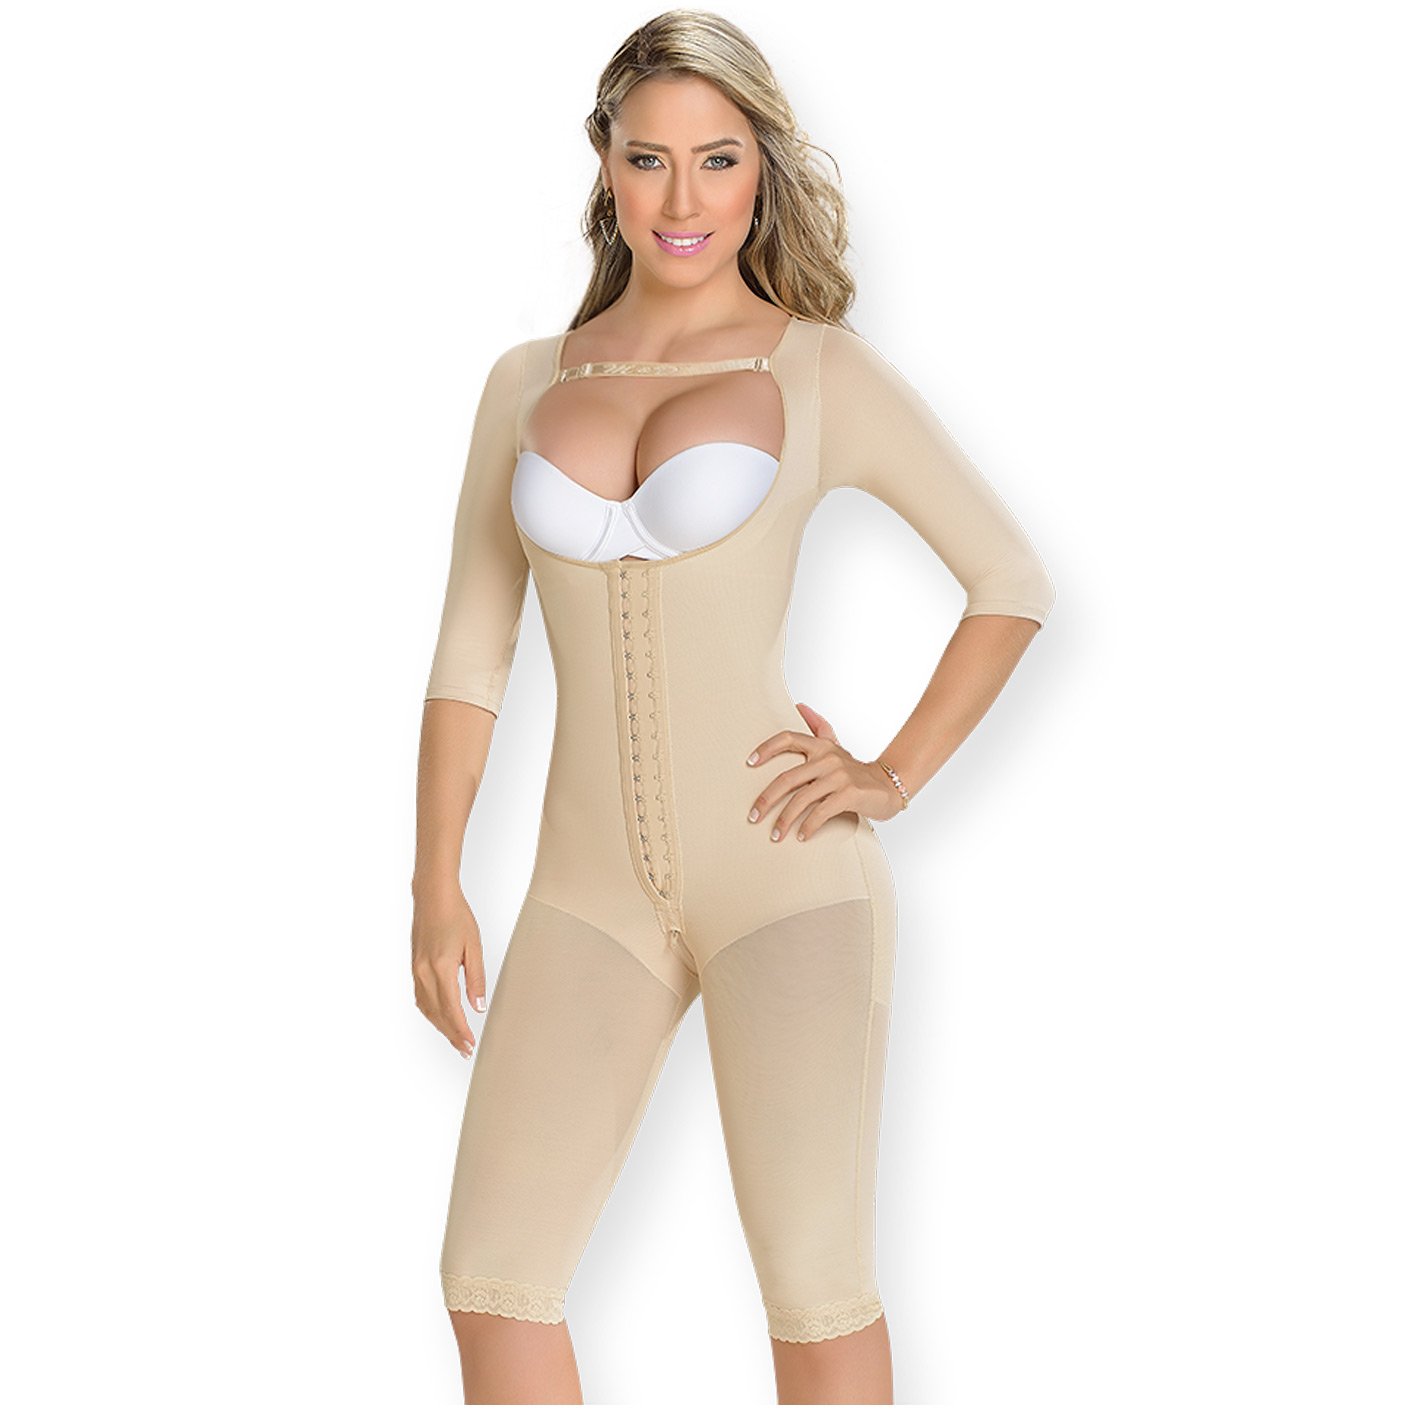 Salome 0517 Colombian Girdles for Women Post Surgery Compression